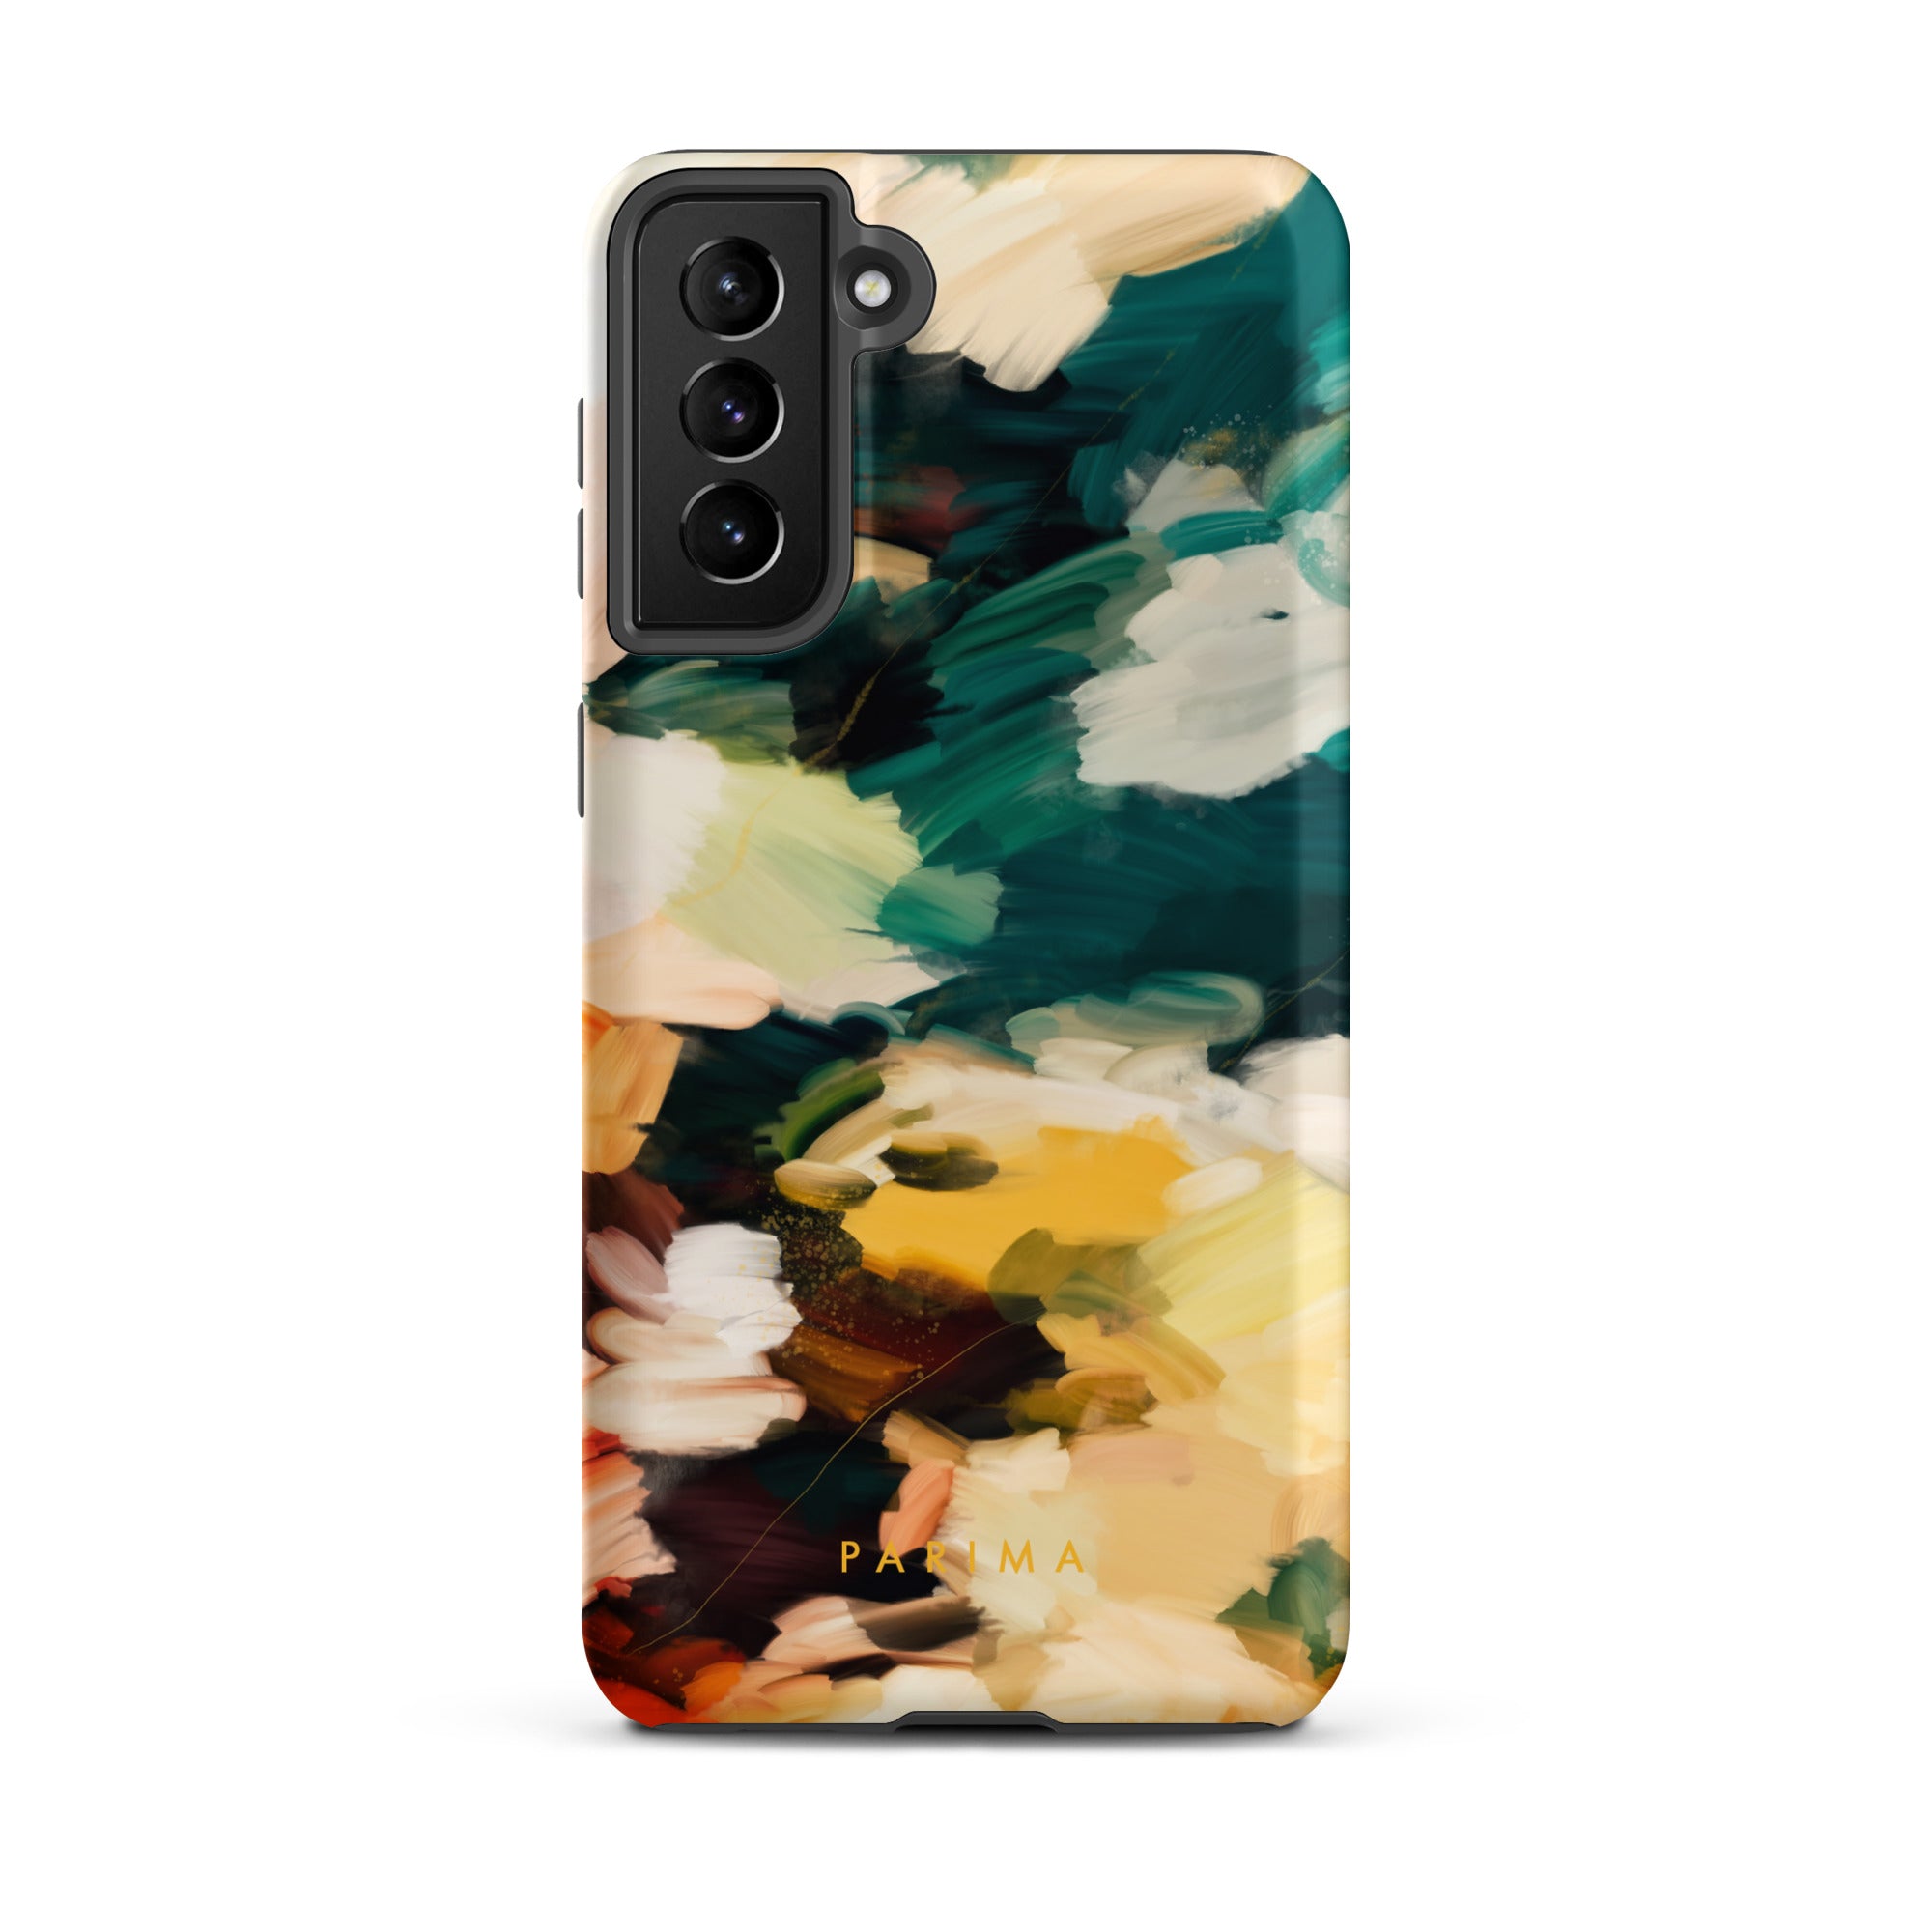 Cinque Terre, green and yellow abstract art on Samsung Galaxy S21 Plus tough case by Parima Studio